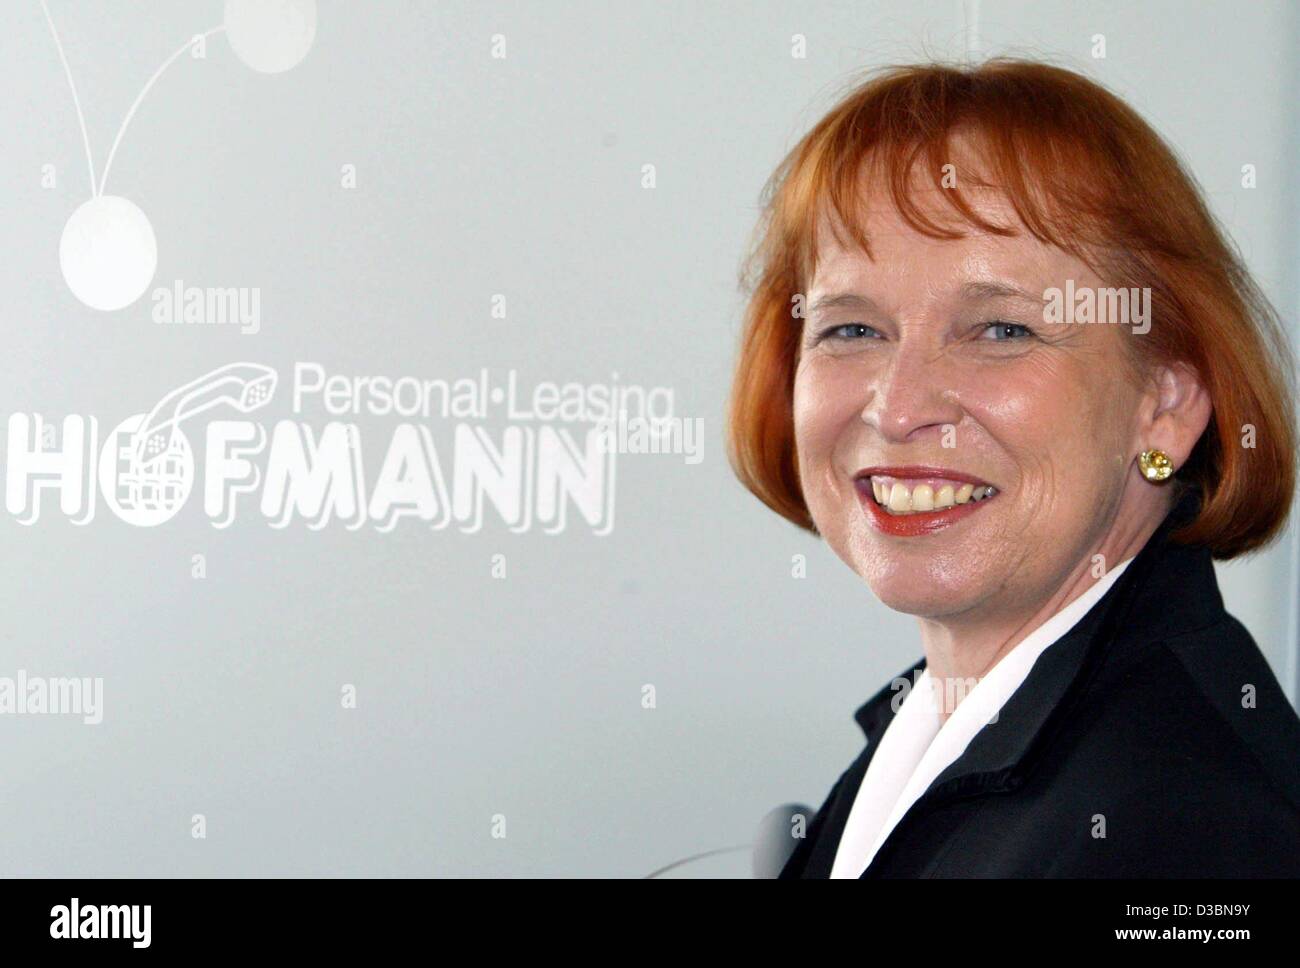 (dpa) - Ingrid Hofman, owner of the company Hofman Personal Leasing GmbH, smiles in front of her company's logo in Nuremberg, Germany, 20 May 2003. The 49-year-old businesswoman was awarded the Prix Veuve Clicquot for Entrepreneur of the Year 2002 in Munich. The Prix Veuve Clicquot is awarded every  Stock Photo